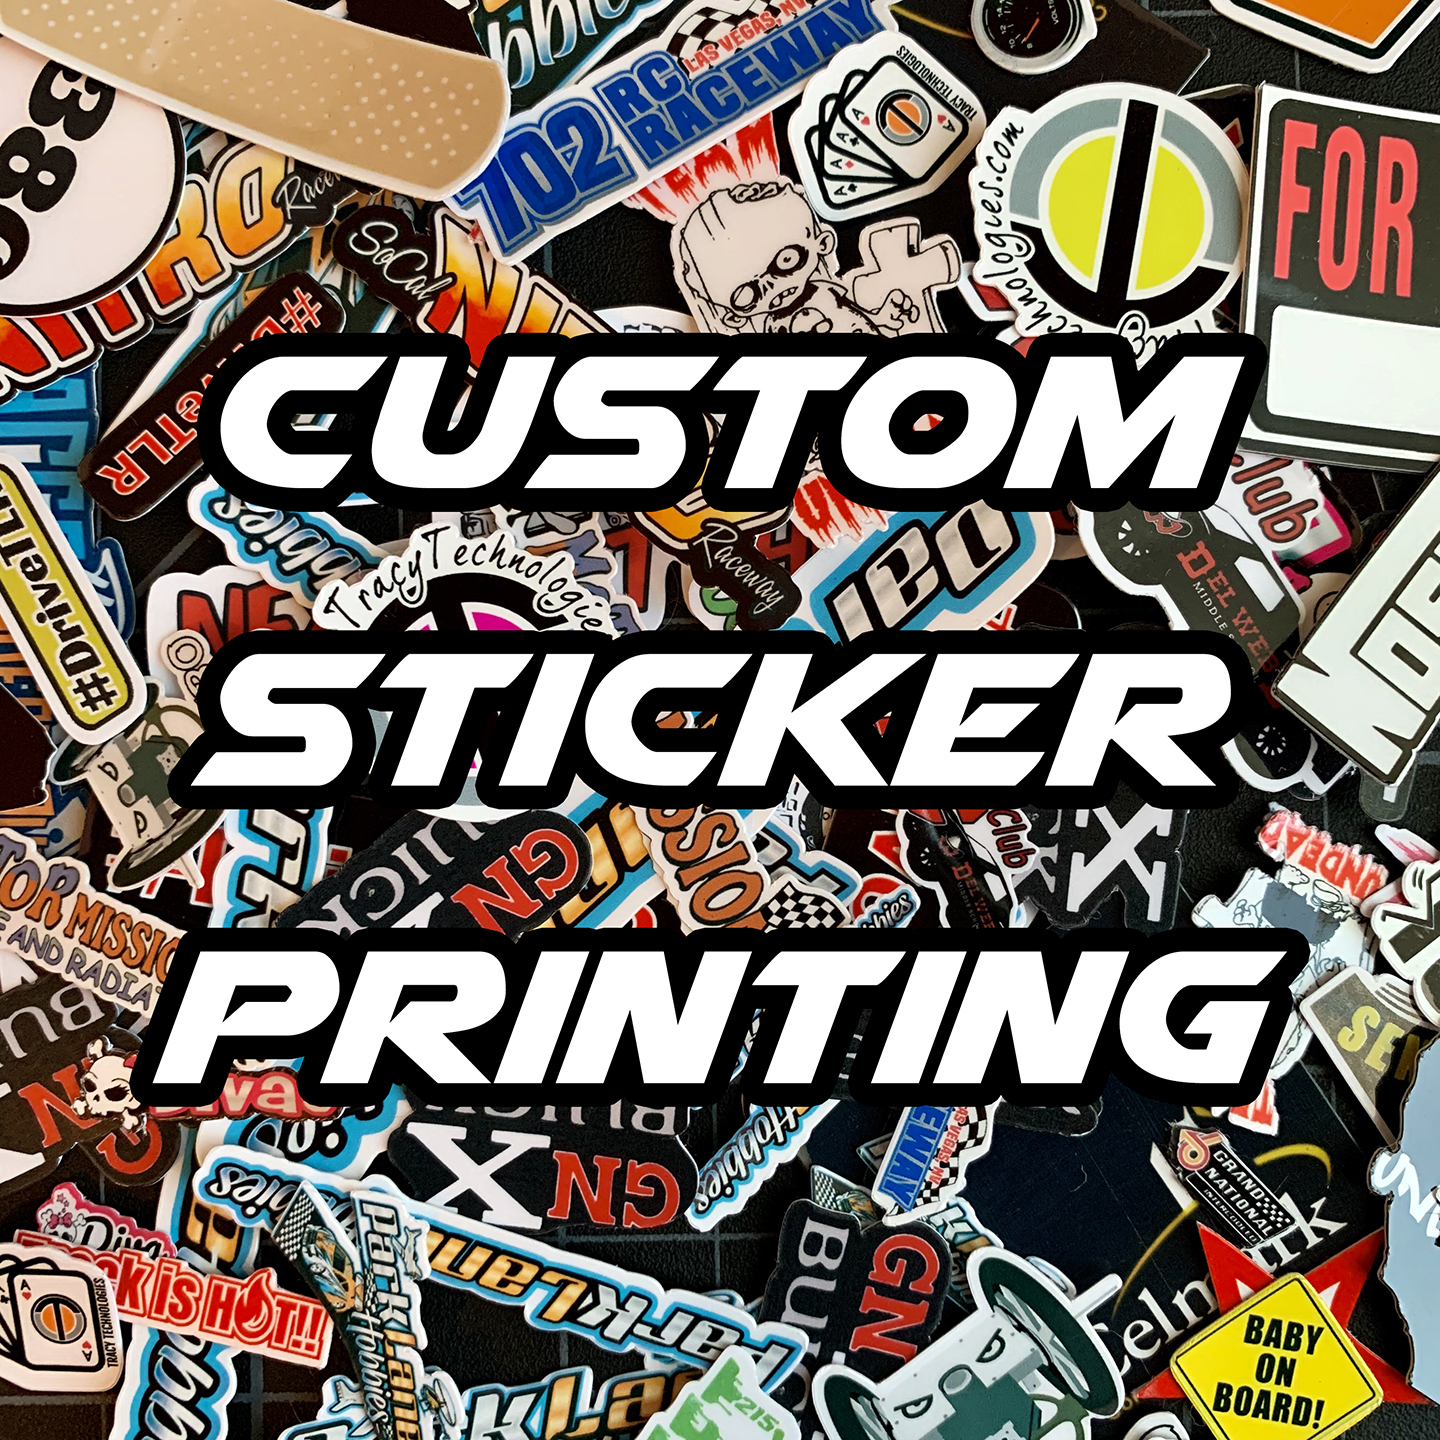 High Quality Custom Stickers, Personalized Sticker Maker